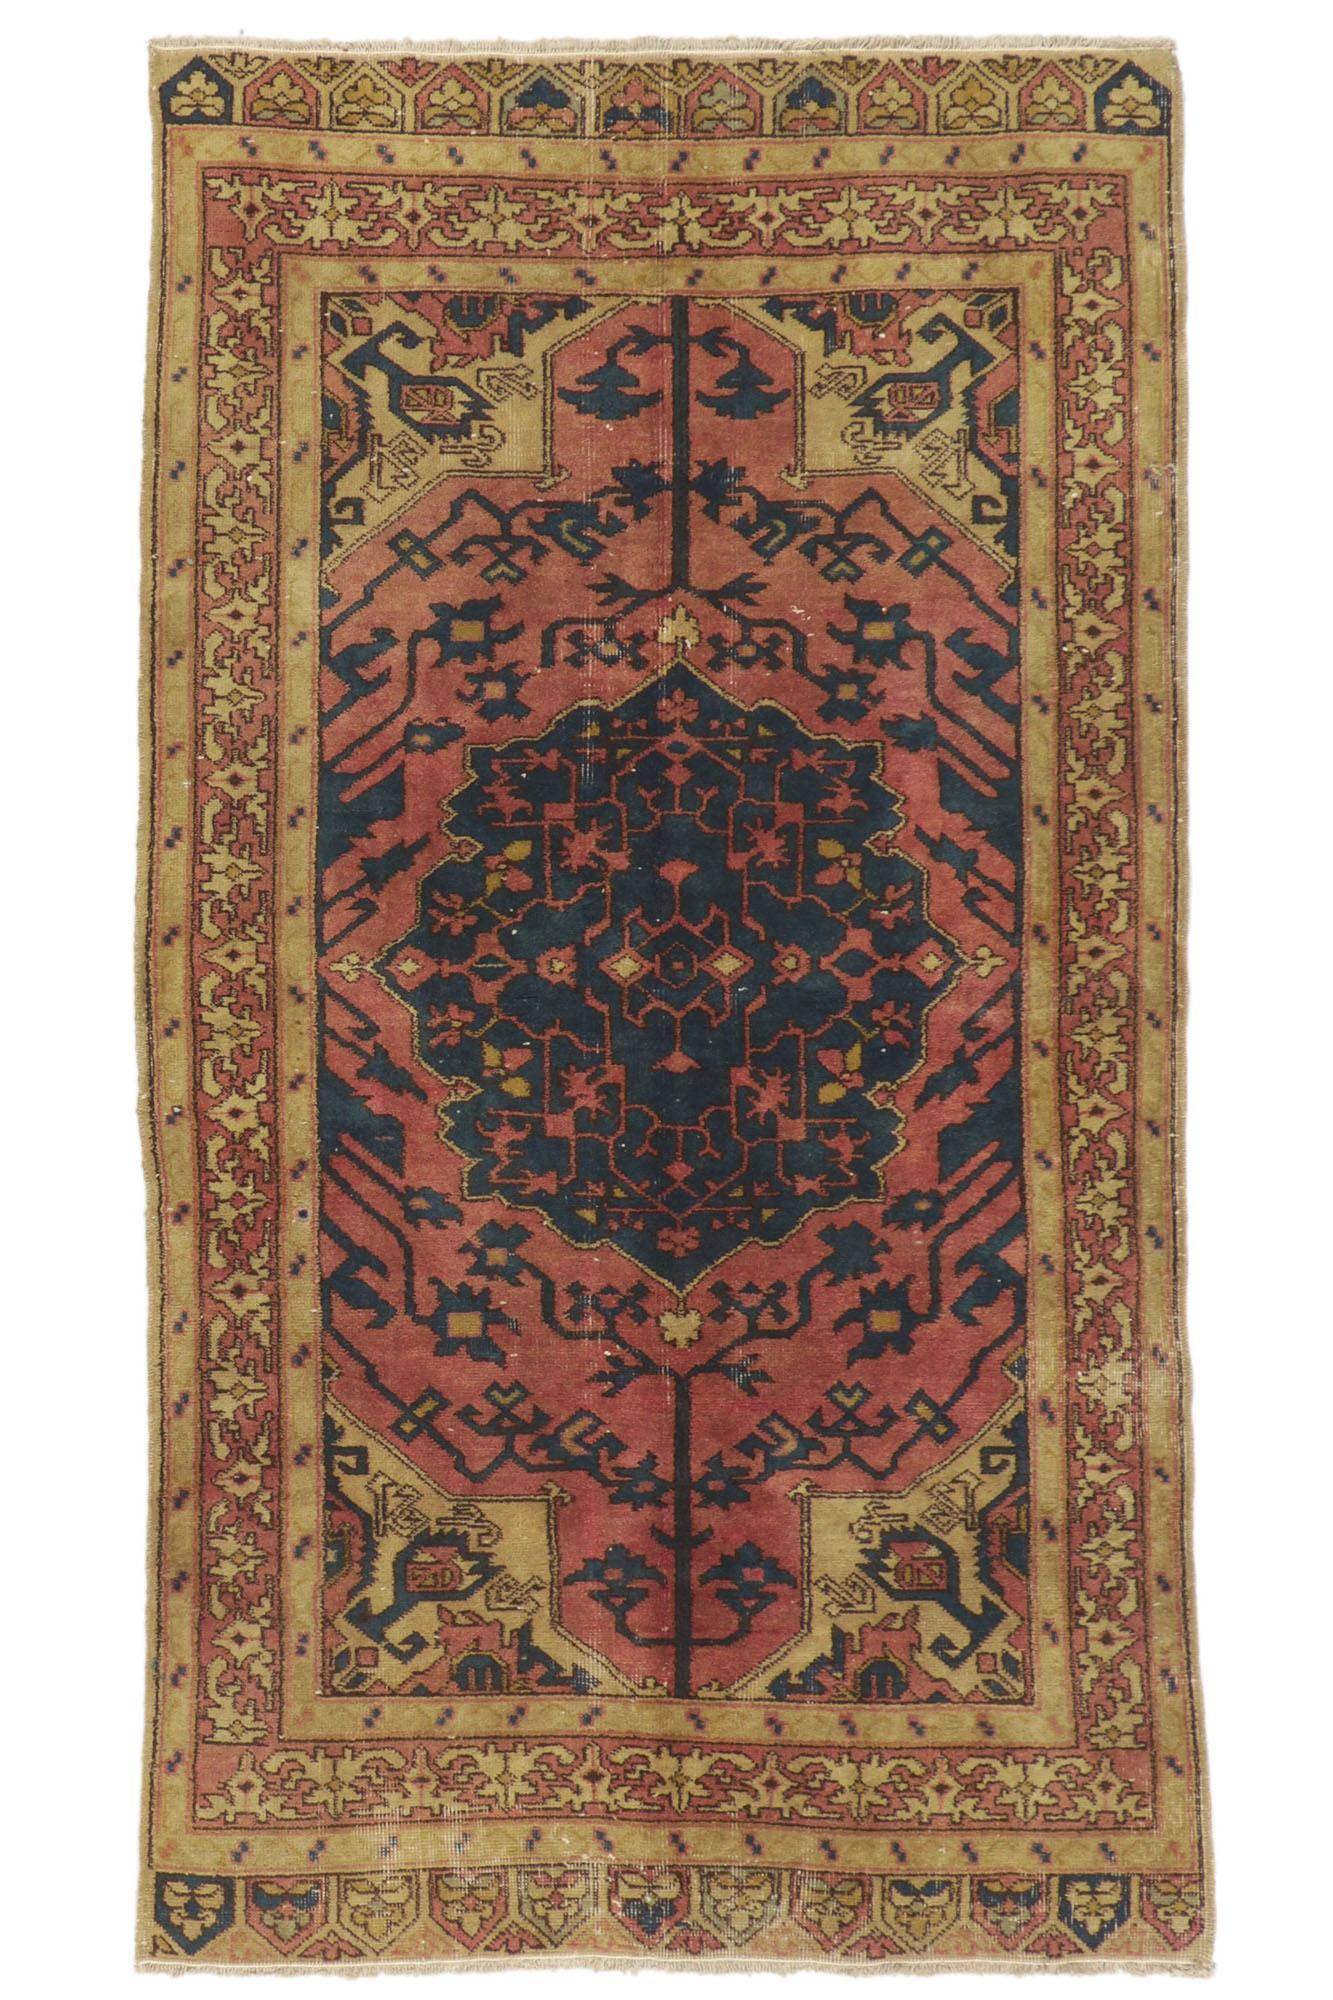 Pair of Matching Vintage Turkish Sivas Rugs with Rustic Earth-Tone Colors For Sale 2